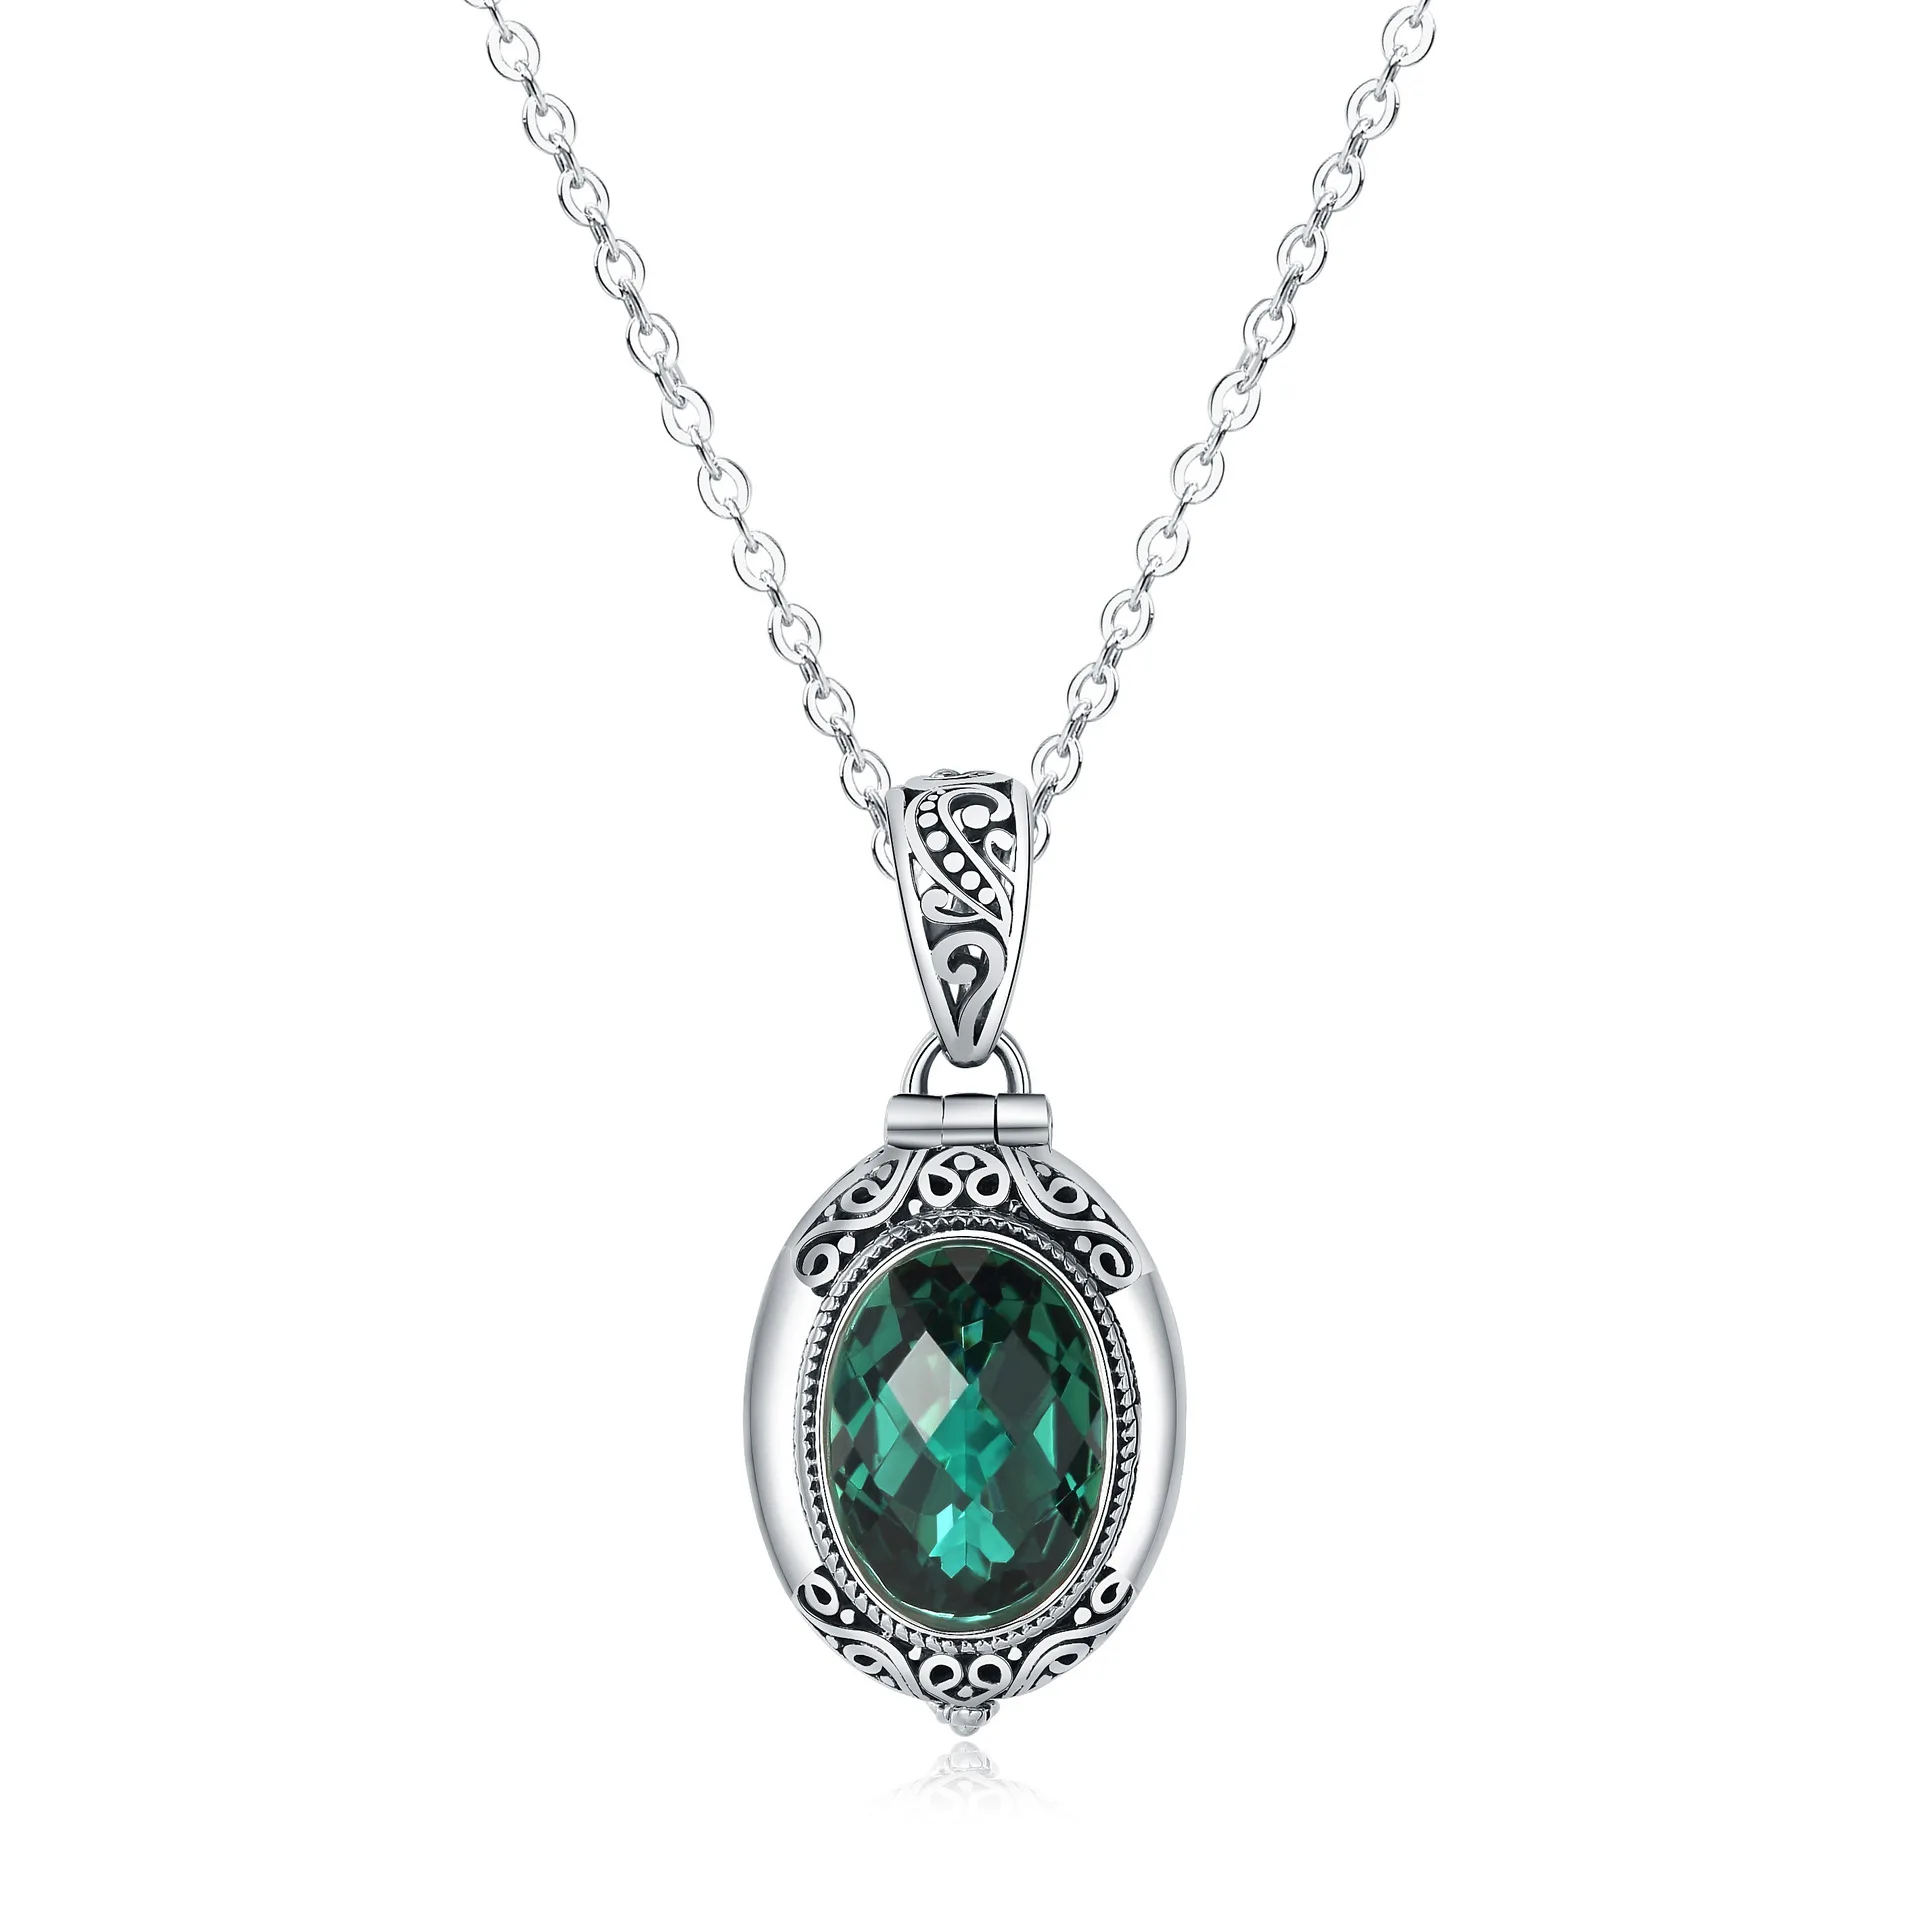 BOCAI S925 Sterling Silver Pendant 2022 New Fashion Can Open Gawu-box Green Crystal Amethyst Pure Argnetum Jewelry for Women